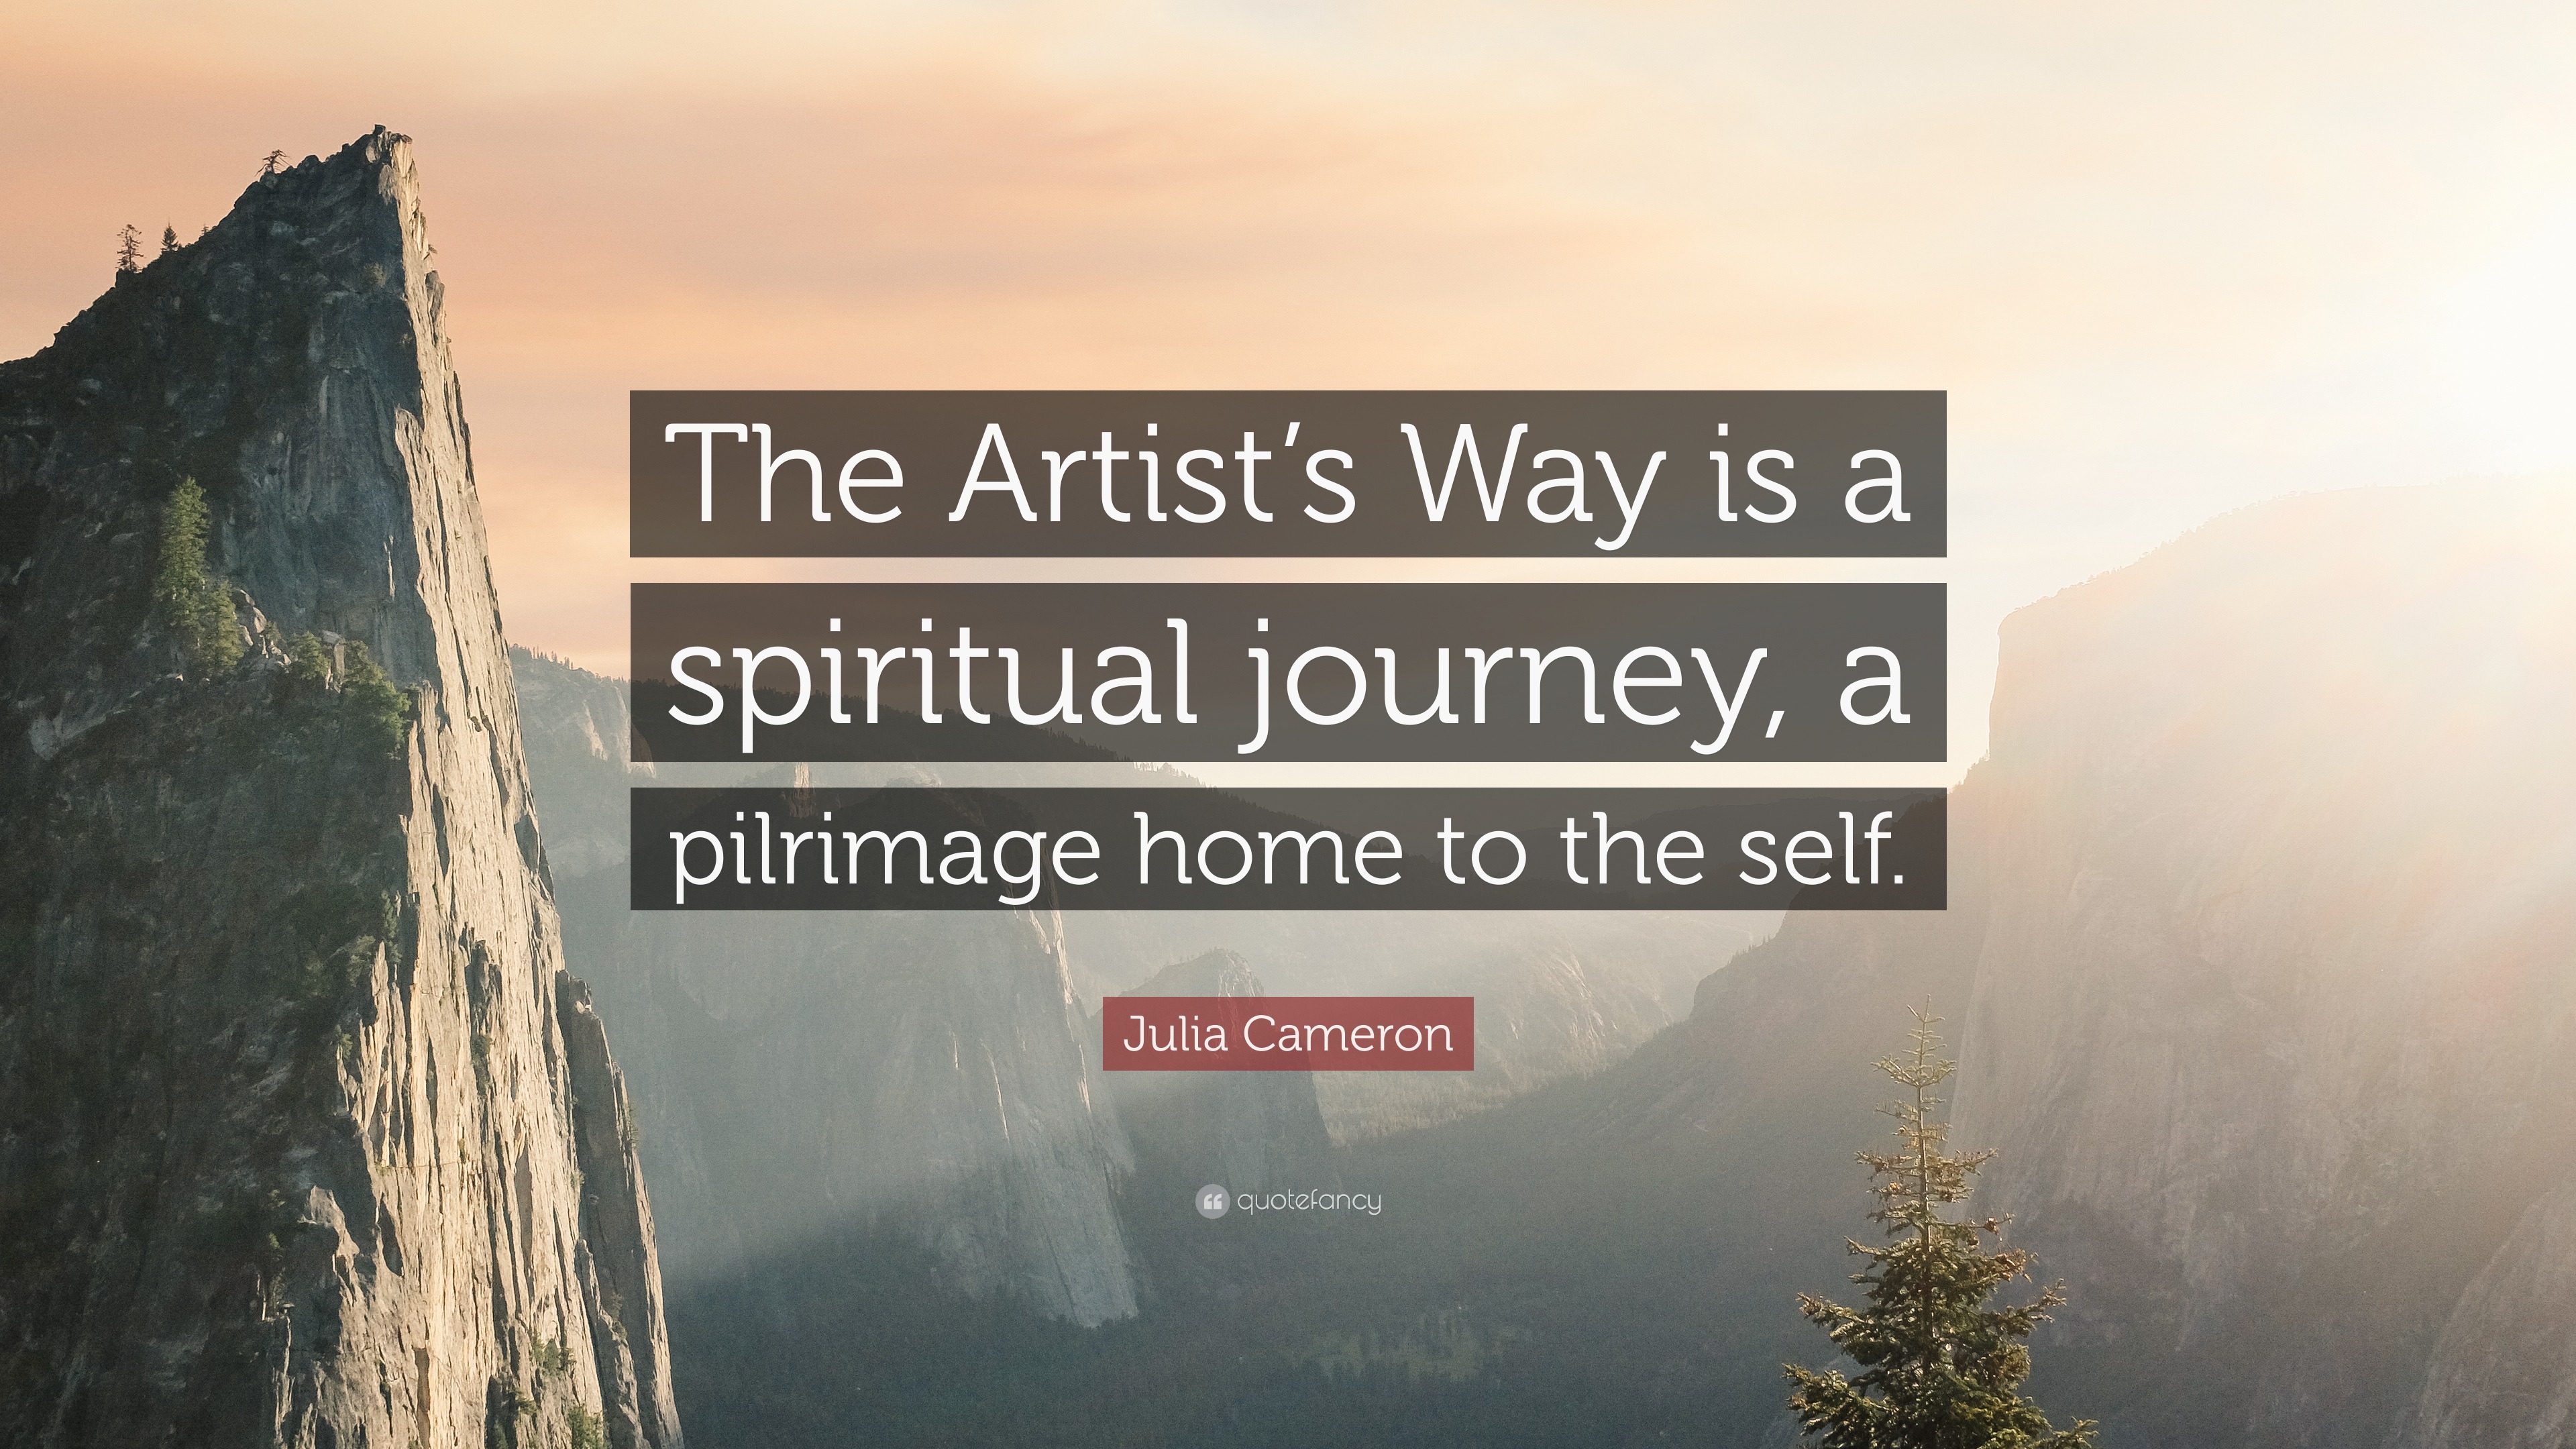 Julia Cameron Quote: “The Artist's Way is a spiritual journey, a pilrimage  home to the self.”